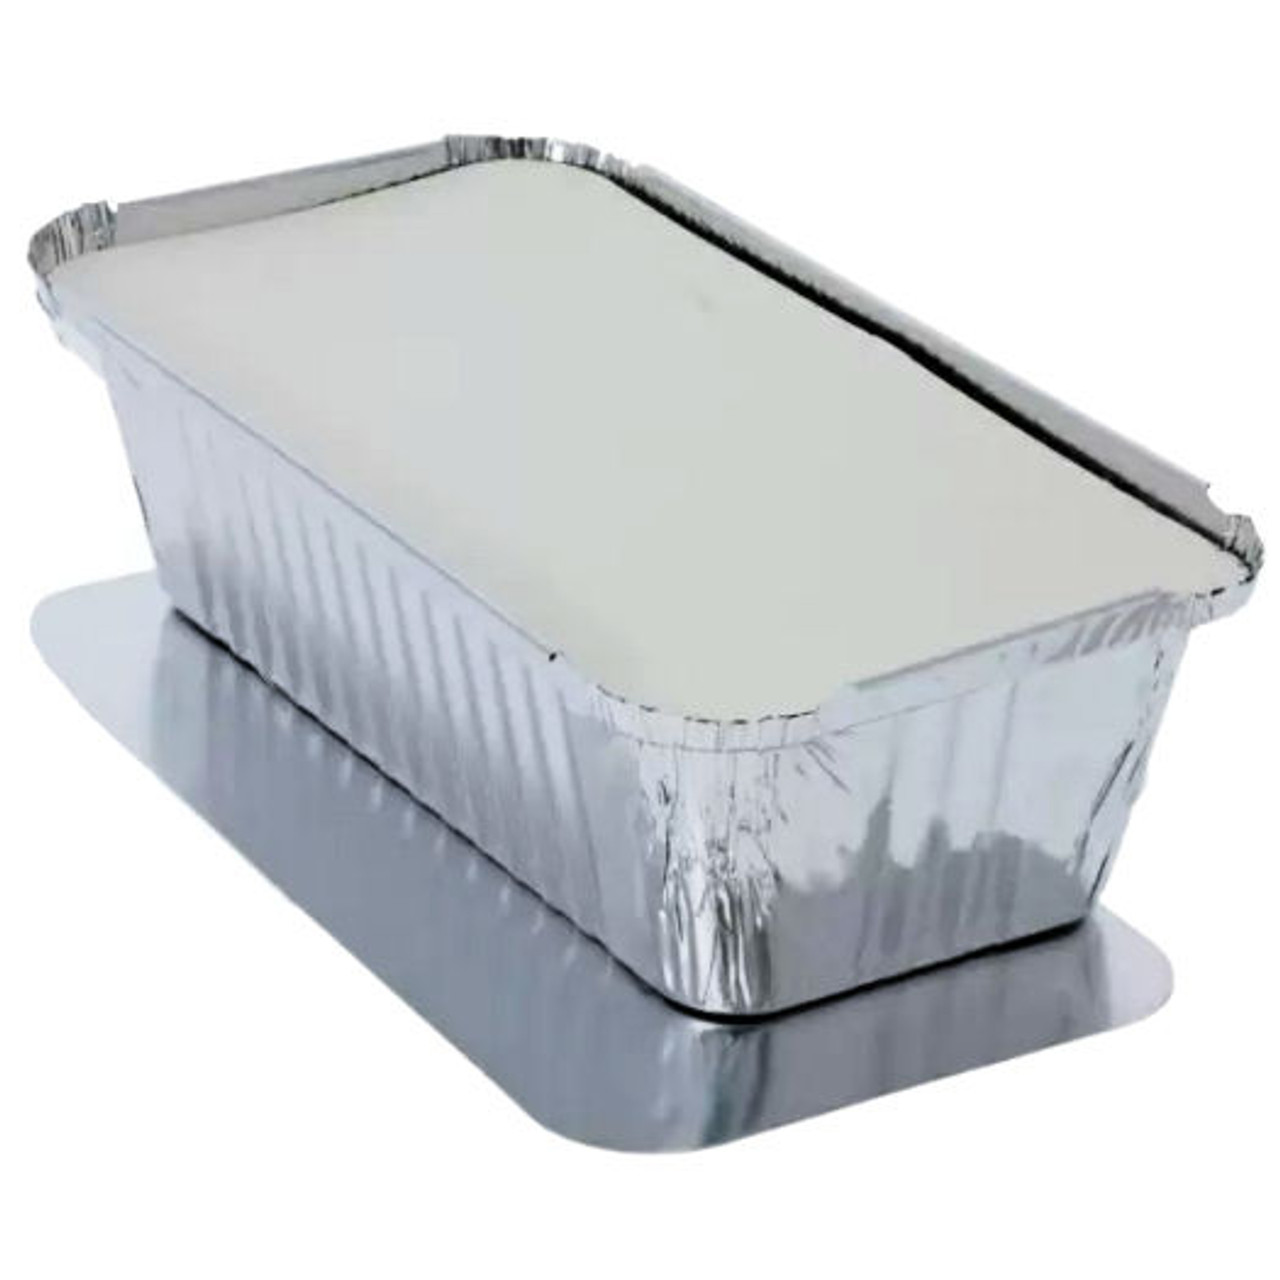 FOIL GASTRO CONTAINER  1/3RD SIZE FOIL CONTAINER